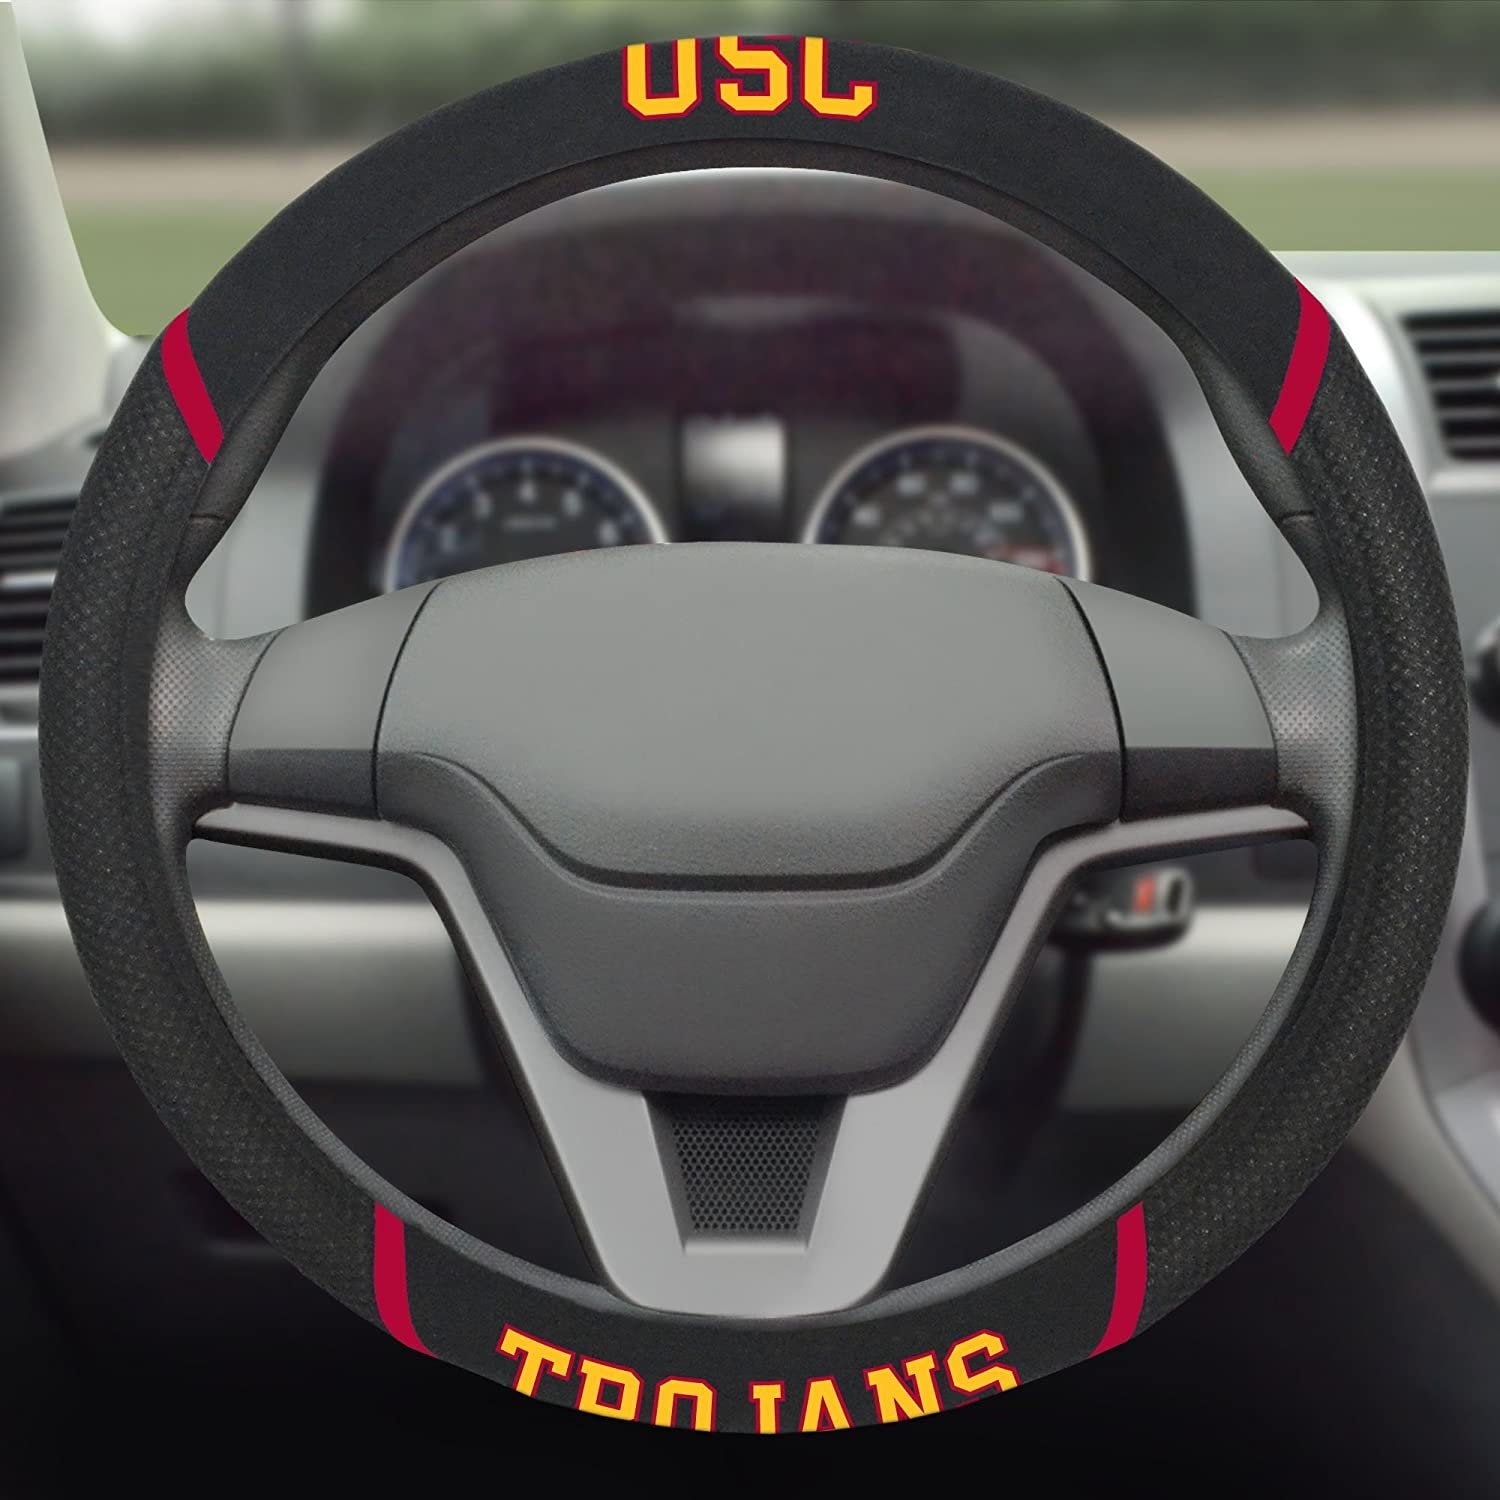 University of Southern California Trojans USC Steering Wheel Cover Embroidered Black 15 Inch